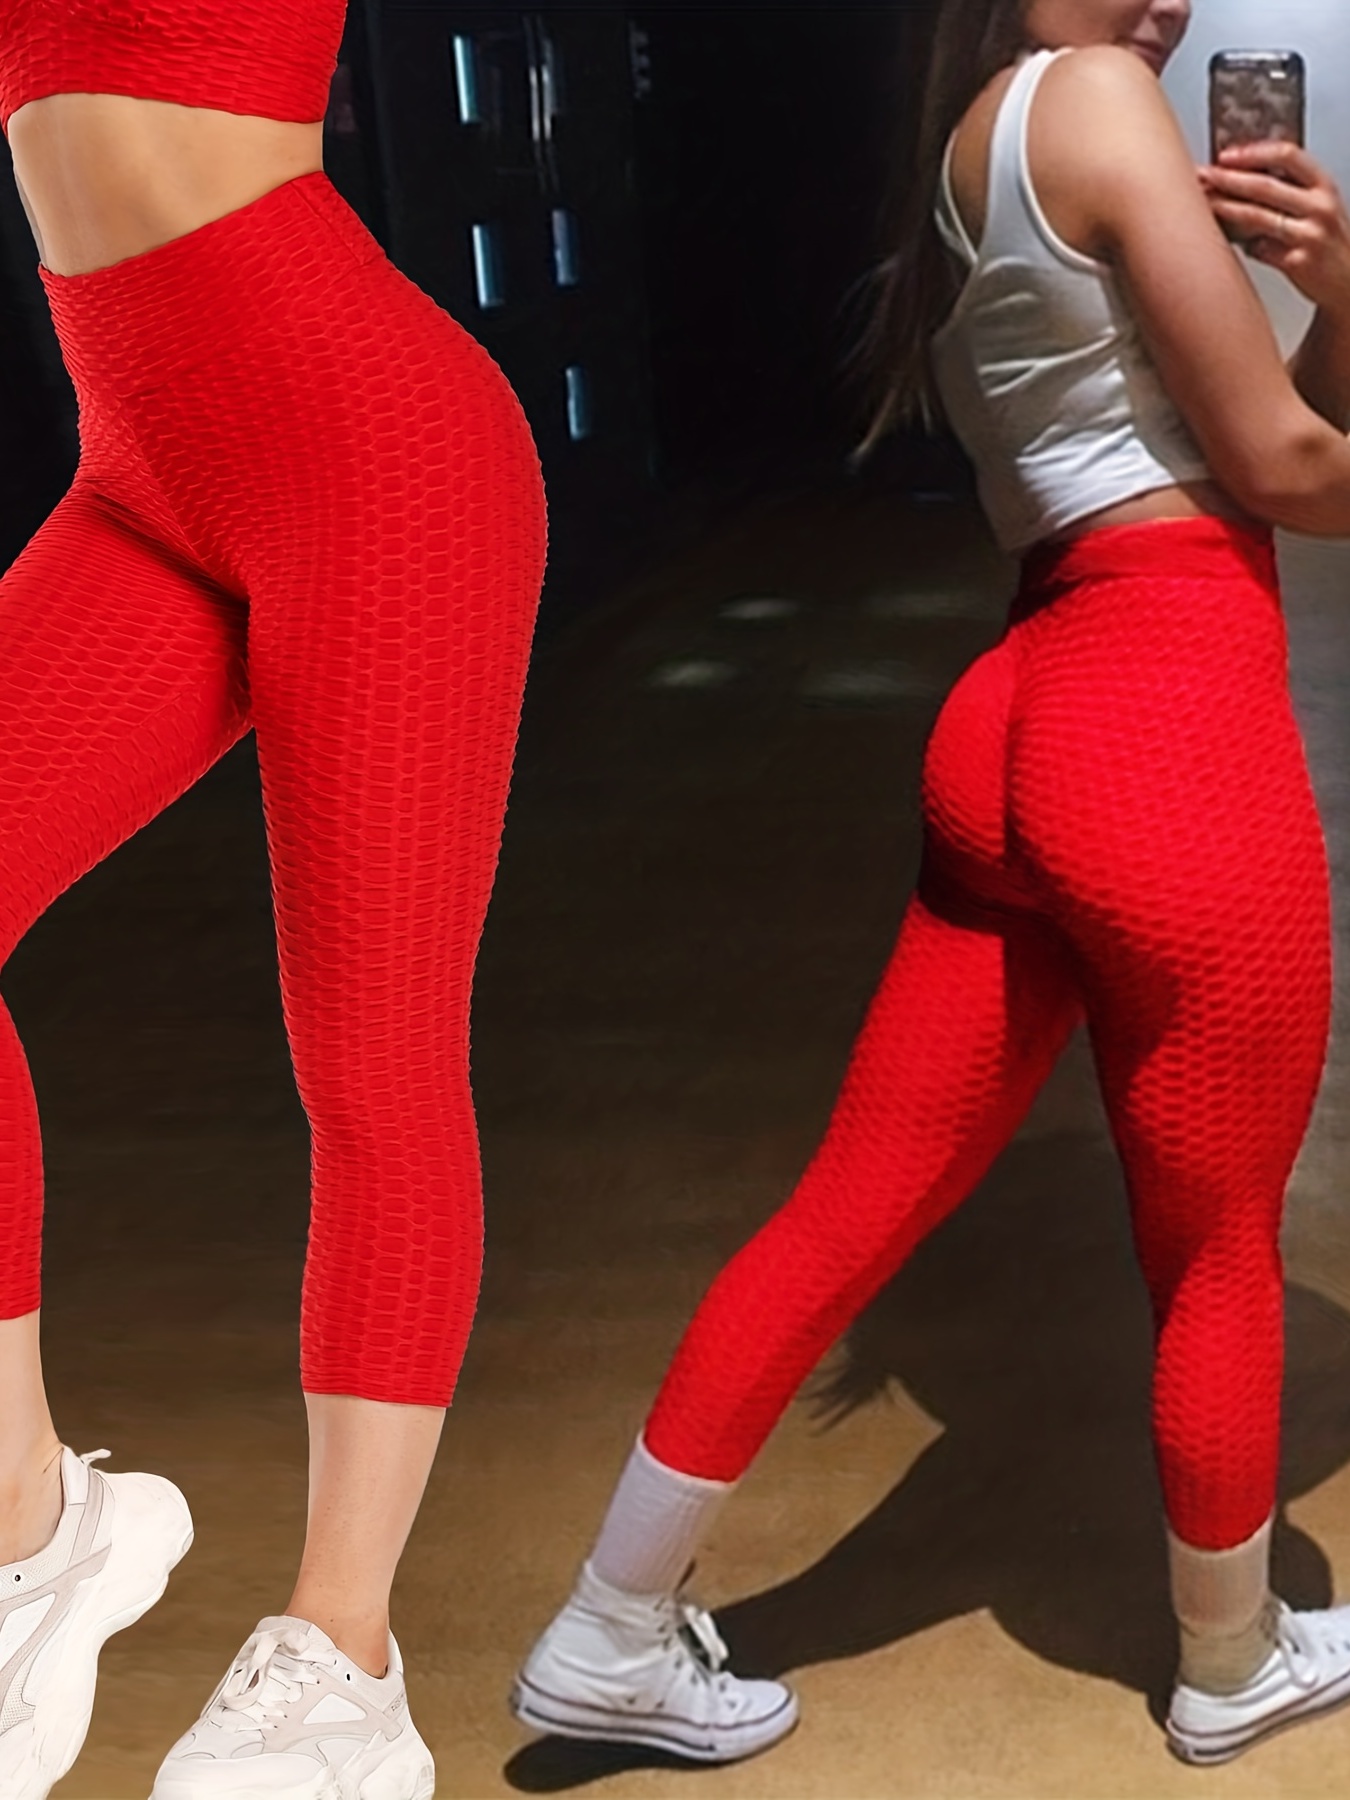 Booty lift scrunch textured leggings - anti cellulite – Fit Doll